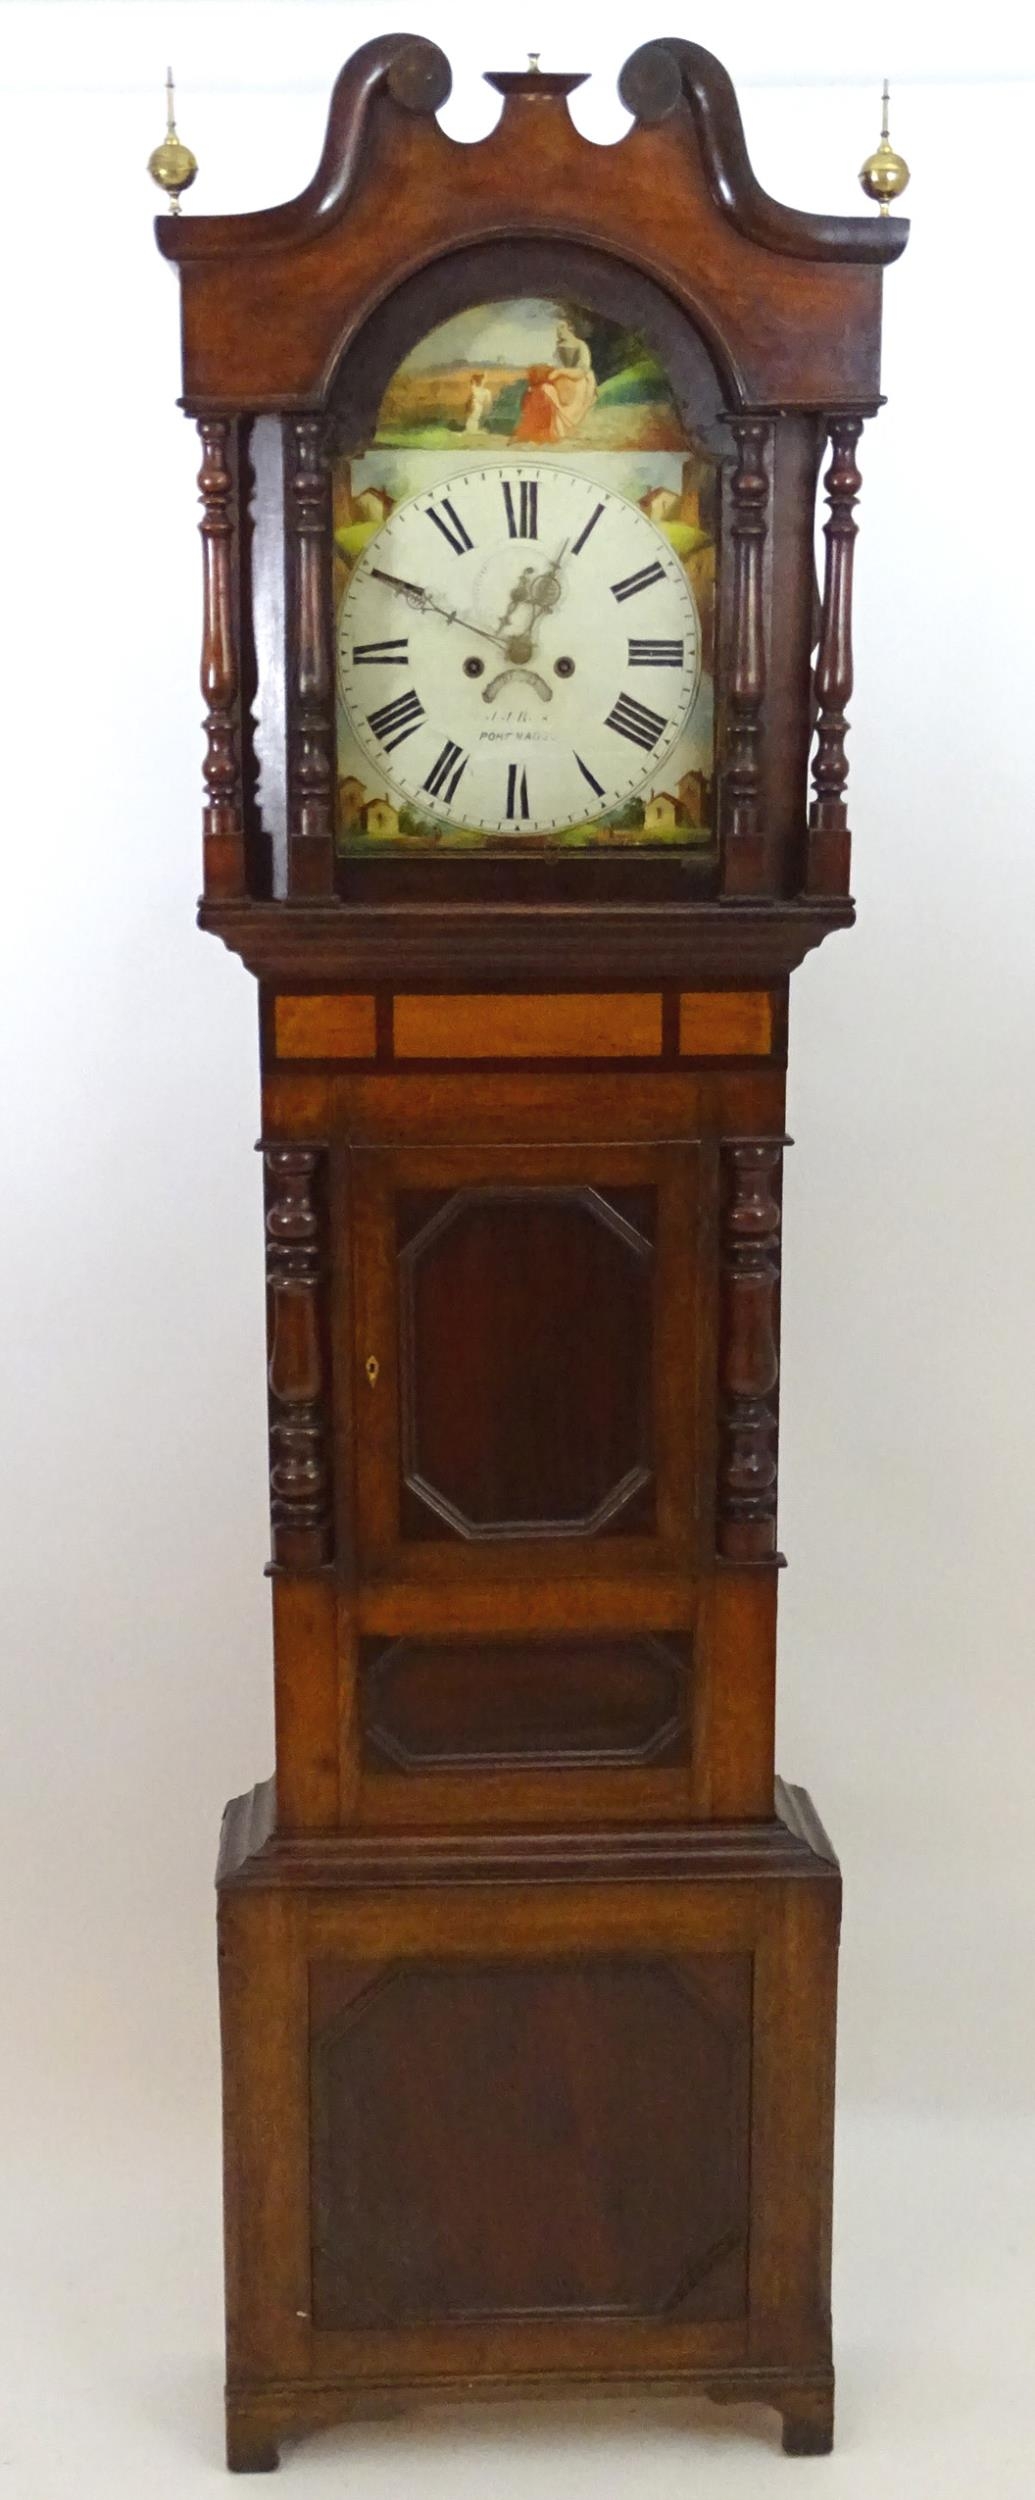 J J Rees Port Madoc : A Welsh Victorian longcase clock with 14" painted dial and 8-day movement. The - Image 8 of 14